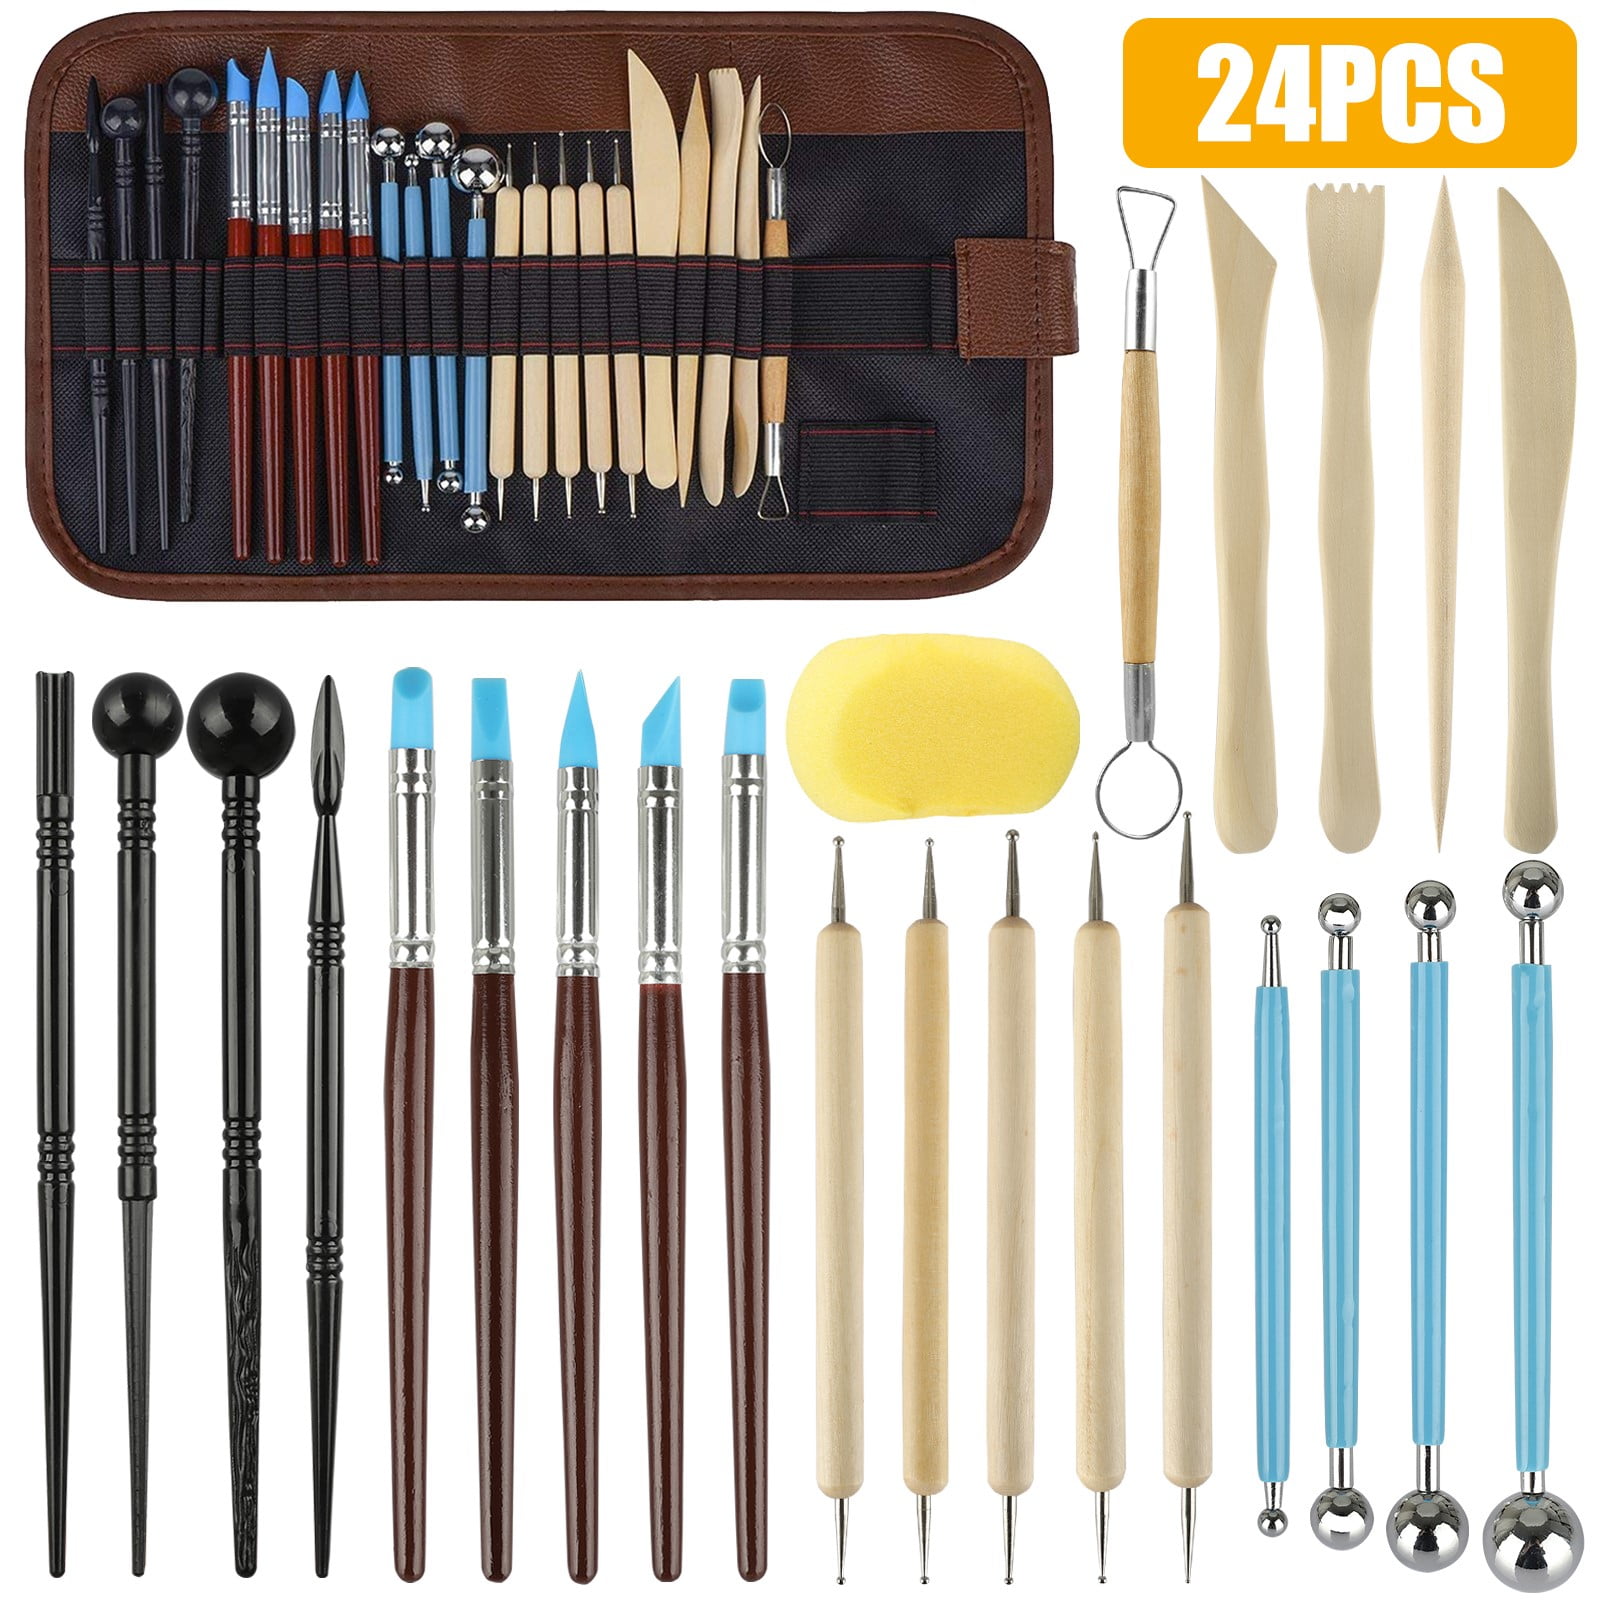 Clay Tools Polymer Sculpting Pottery Set Carving Ceramic Tool Modeling Craft Art 